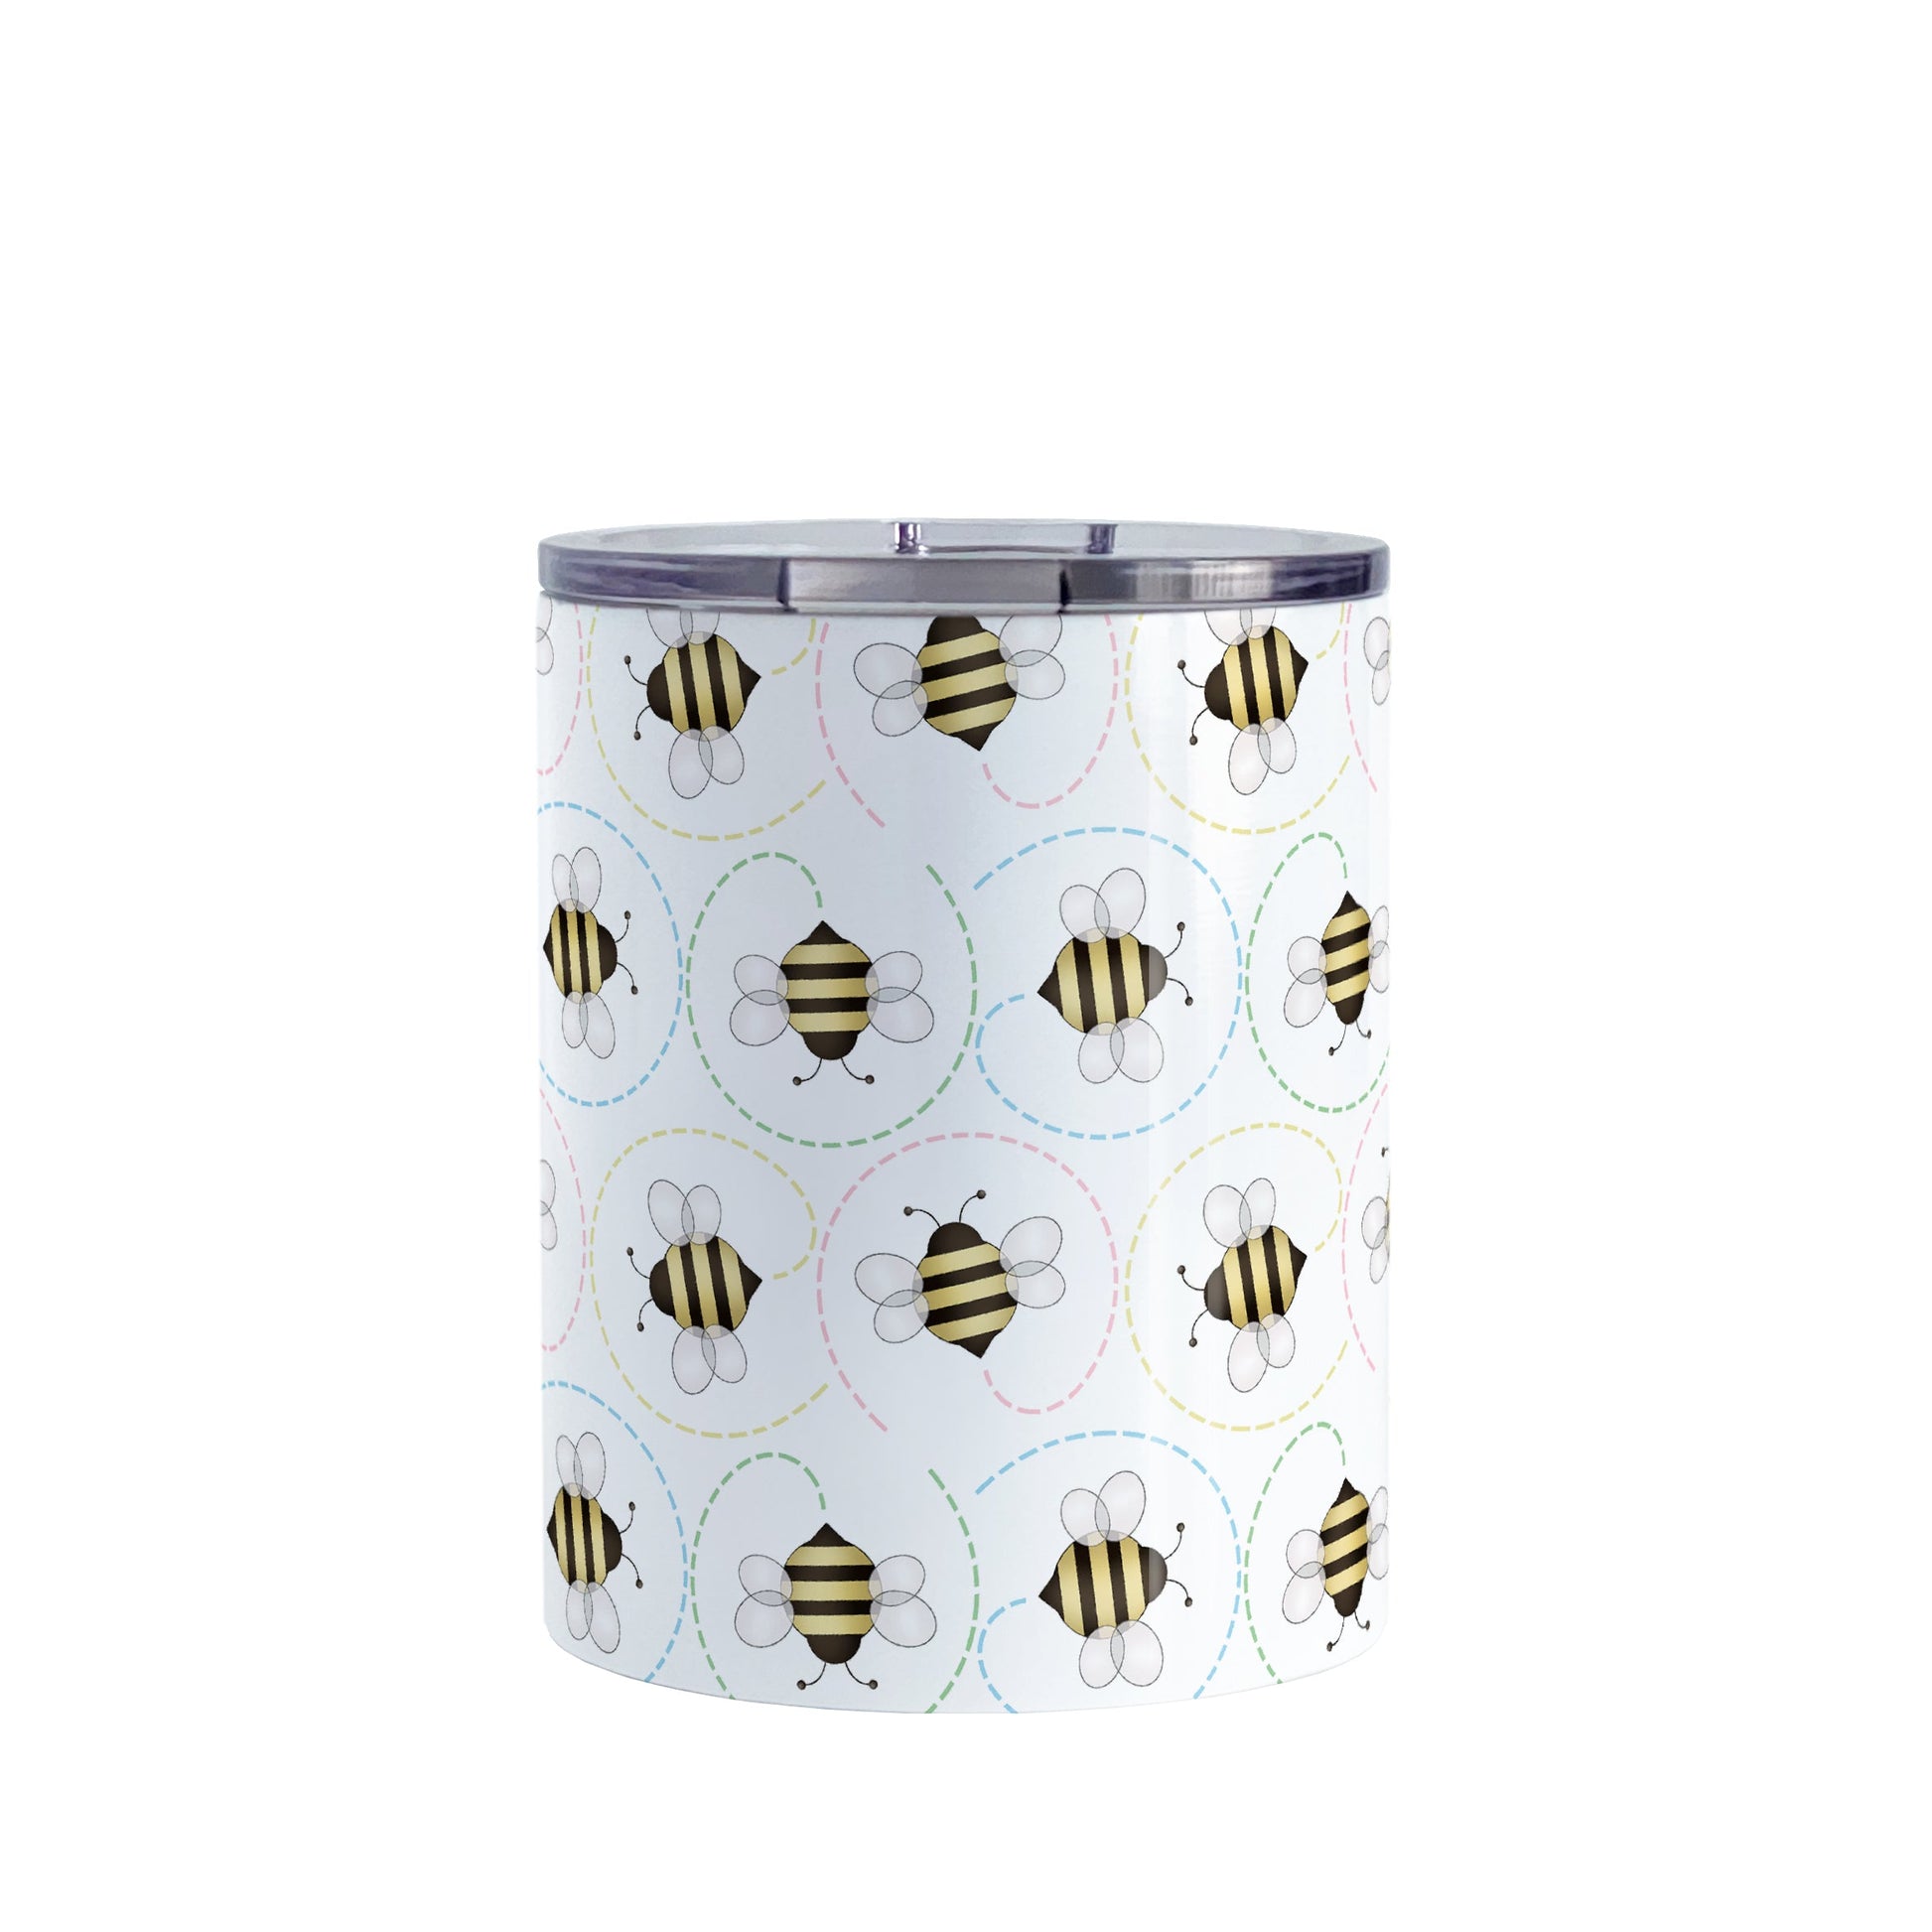 Circling Dainty Bee Pattern Tumbler Cup (10oz, stainless steel insulated) at Amy's Coffee Mugs. A bee tumbler cup with adorable dainty black and yellow bees in a pattern around the cup with colorful dotted line circling flight paths. A minimalist bee design for bee lovers who also love color and happy designs.